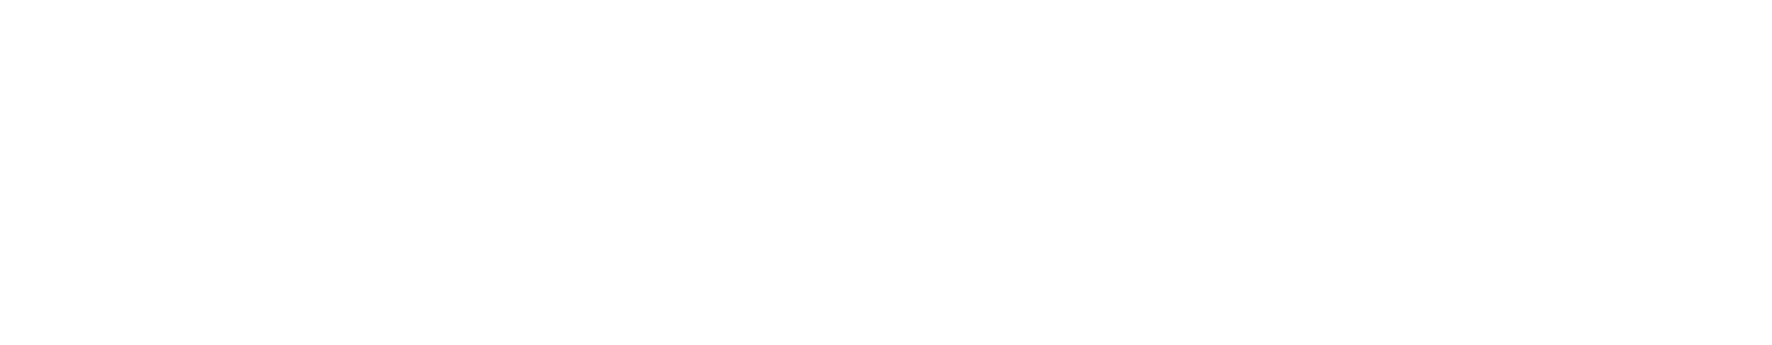 Parts on Demand is EOS Contract Manufacturing Partner